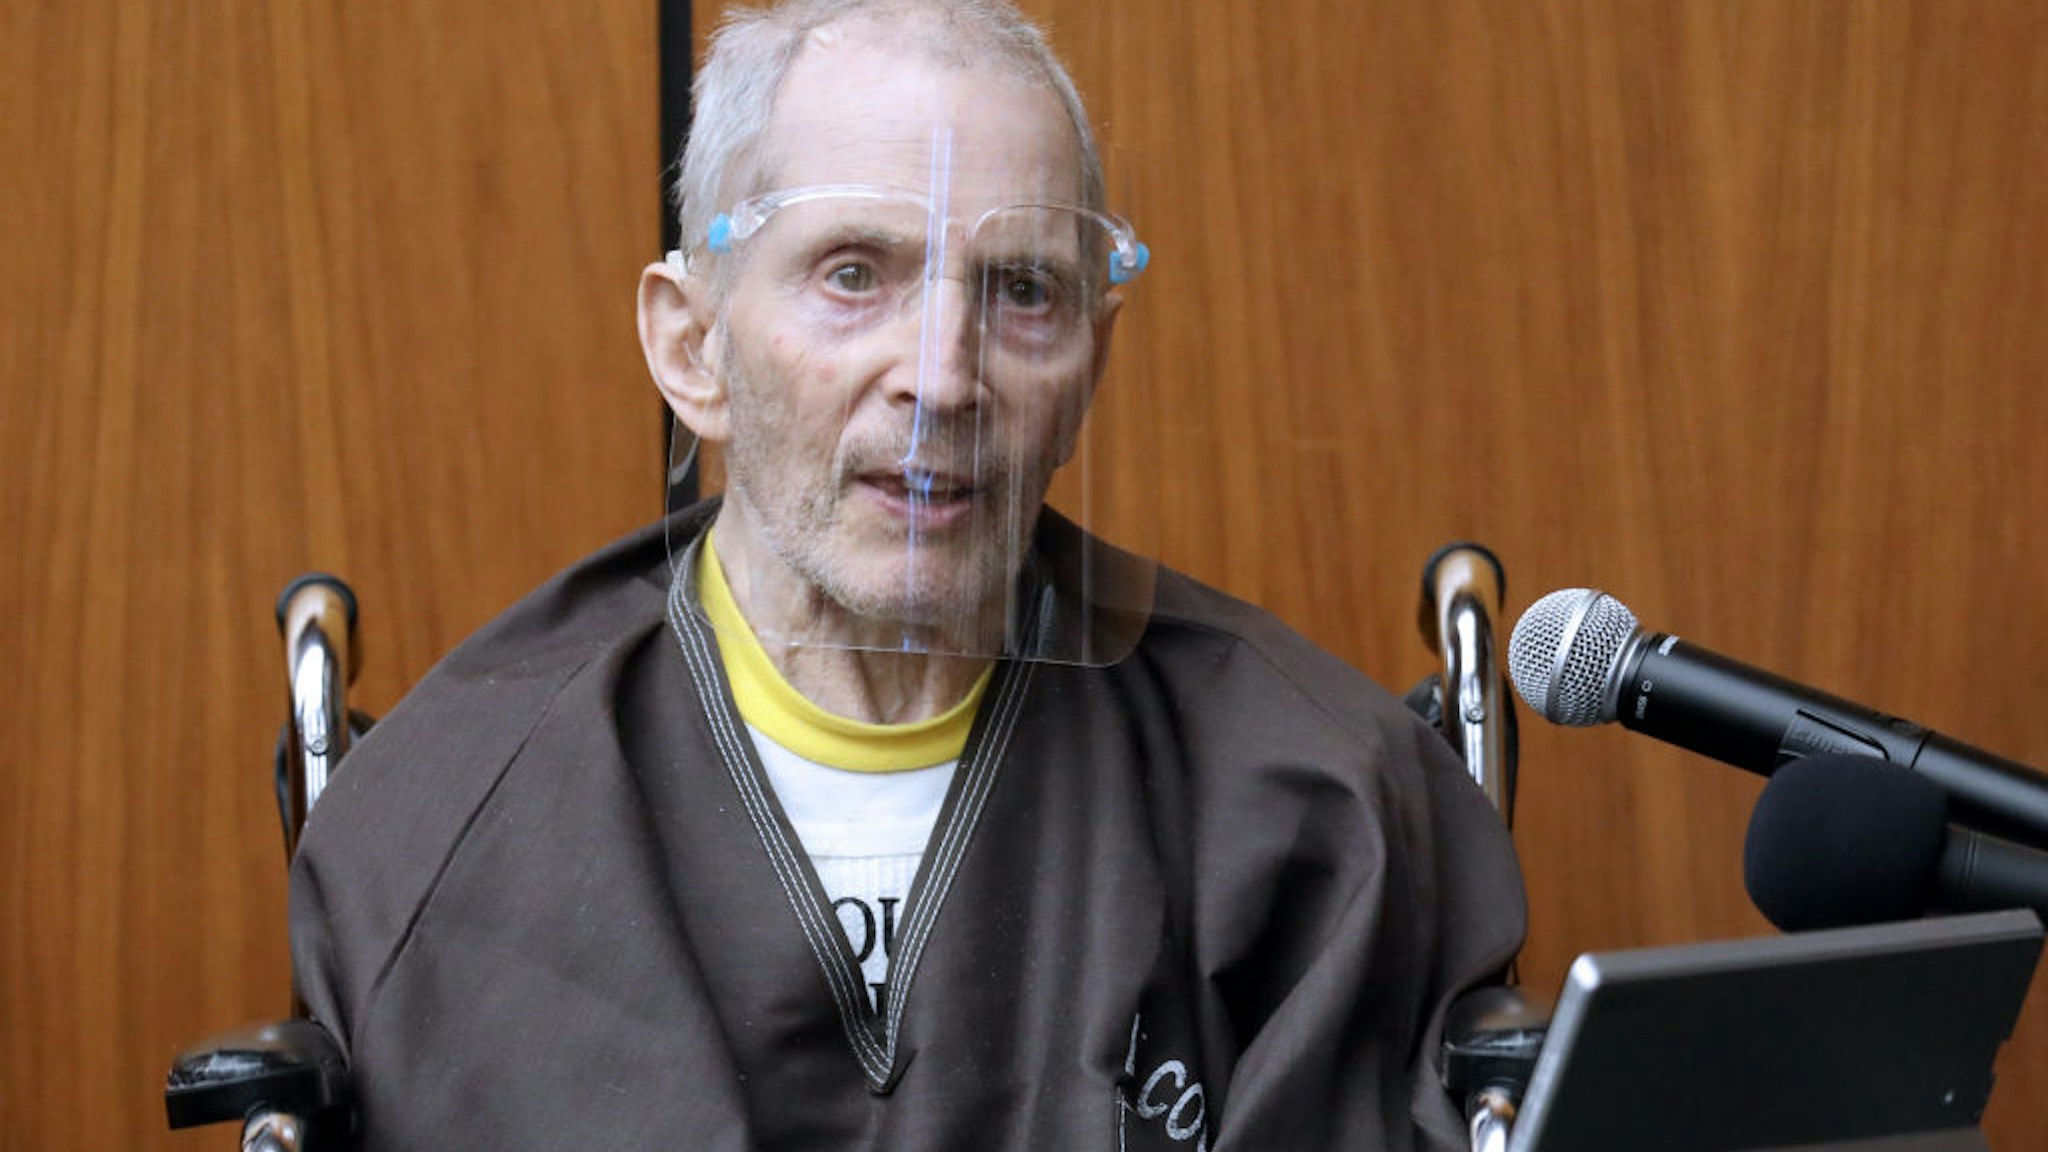 Robert Durst, 78, New York real estate scion, takes the stand and testifies in his murder trial answering questions from defense attorney Dick DeGuerin, left, at the Inglewood Courthouse on Monday, Aug. 9, 2021 in Inglewood, CA.